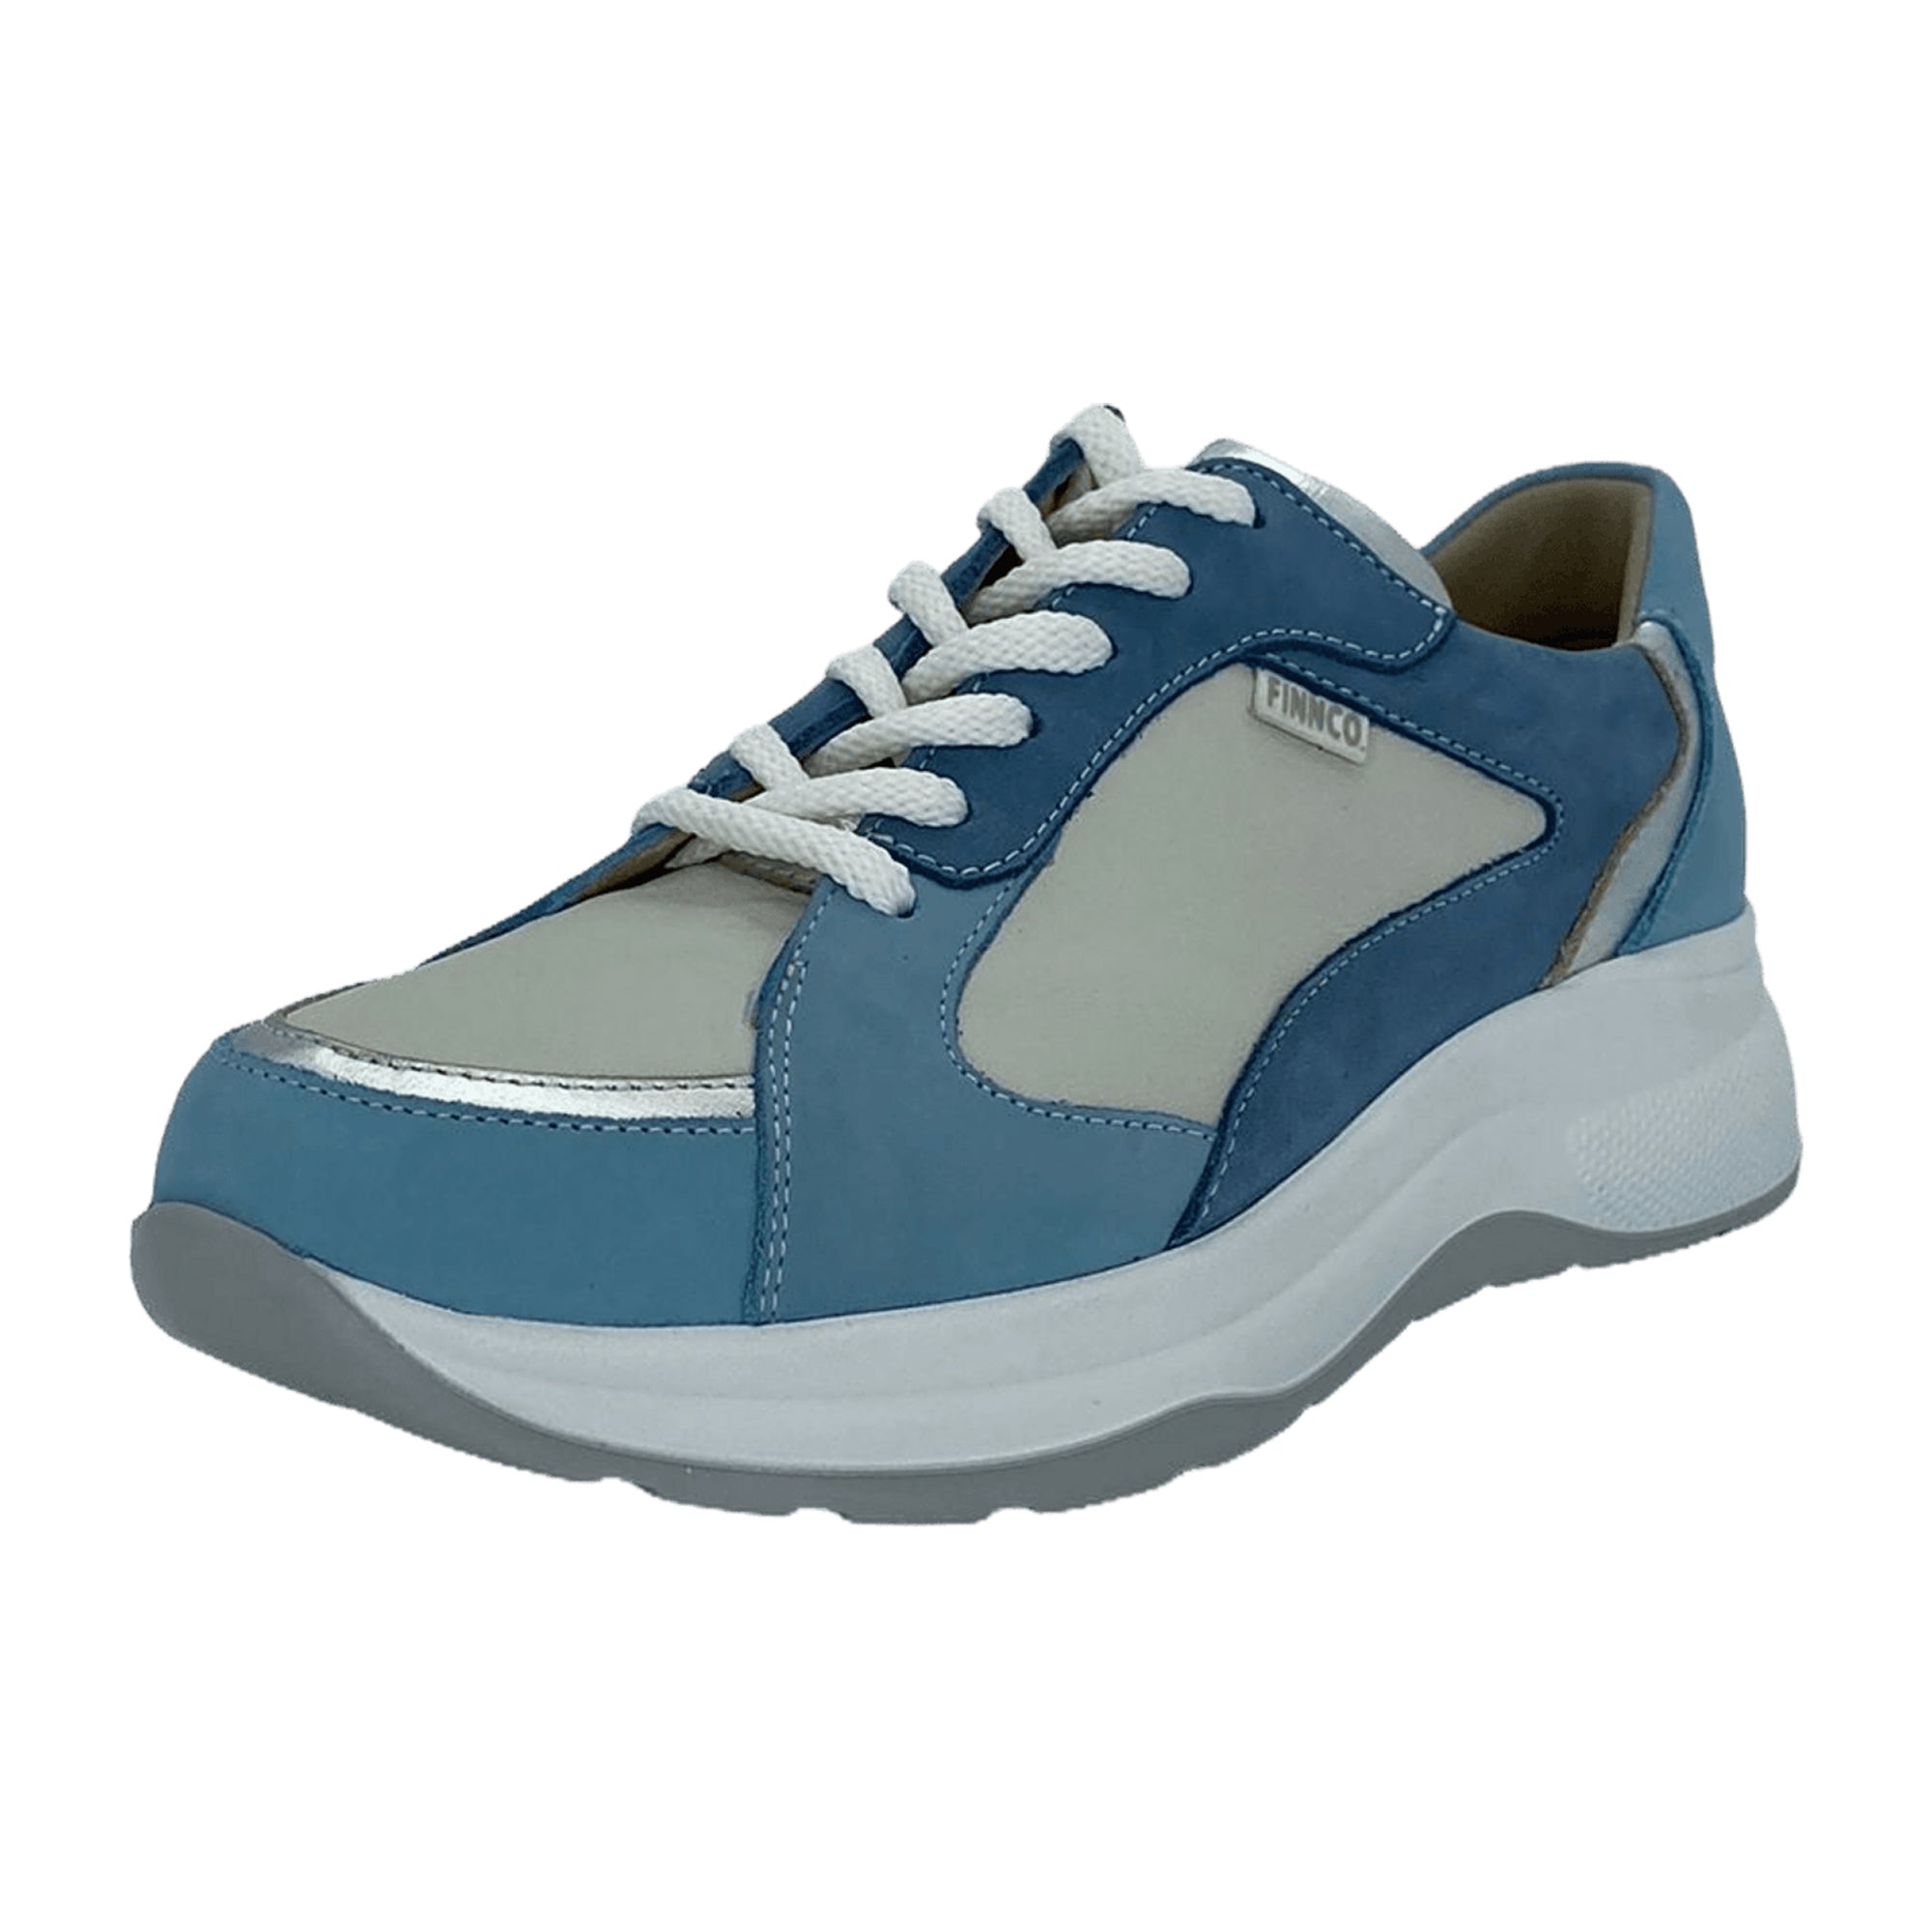 Finn Comfort Piccadilly Women's Comfortable Blue Shoes - Stylish & Durable